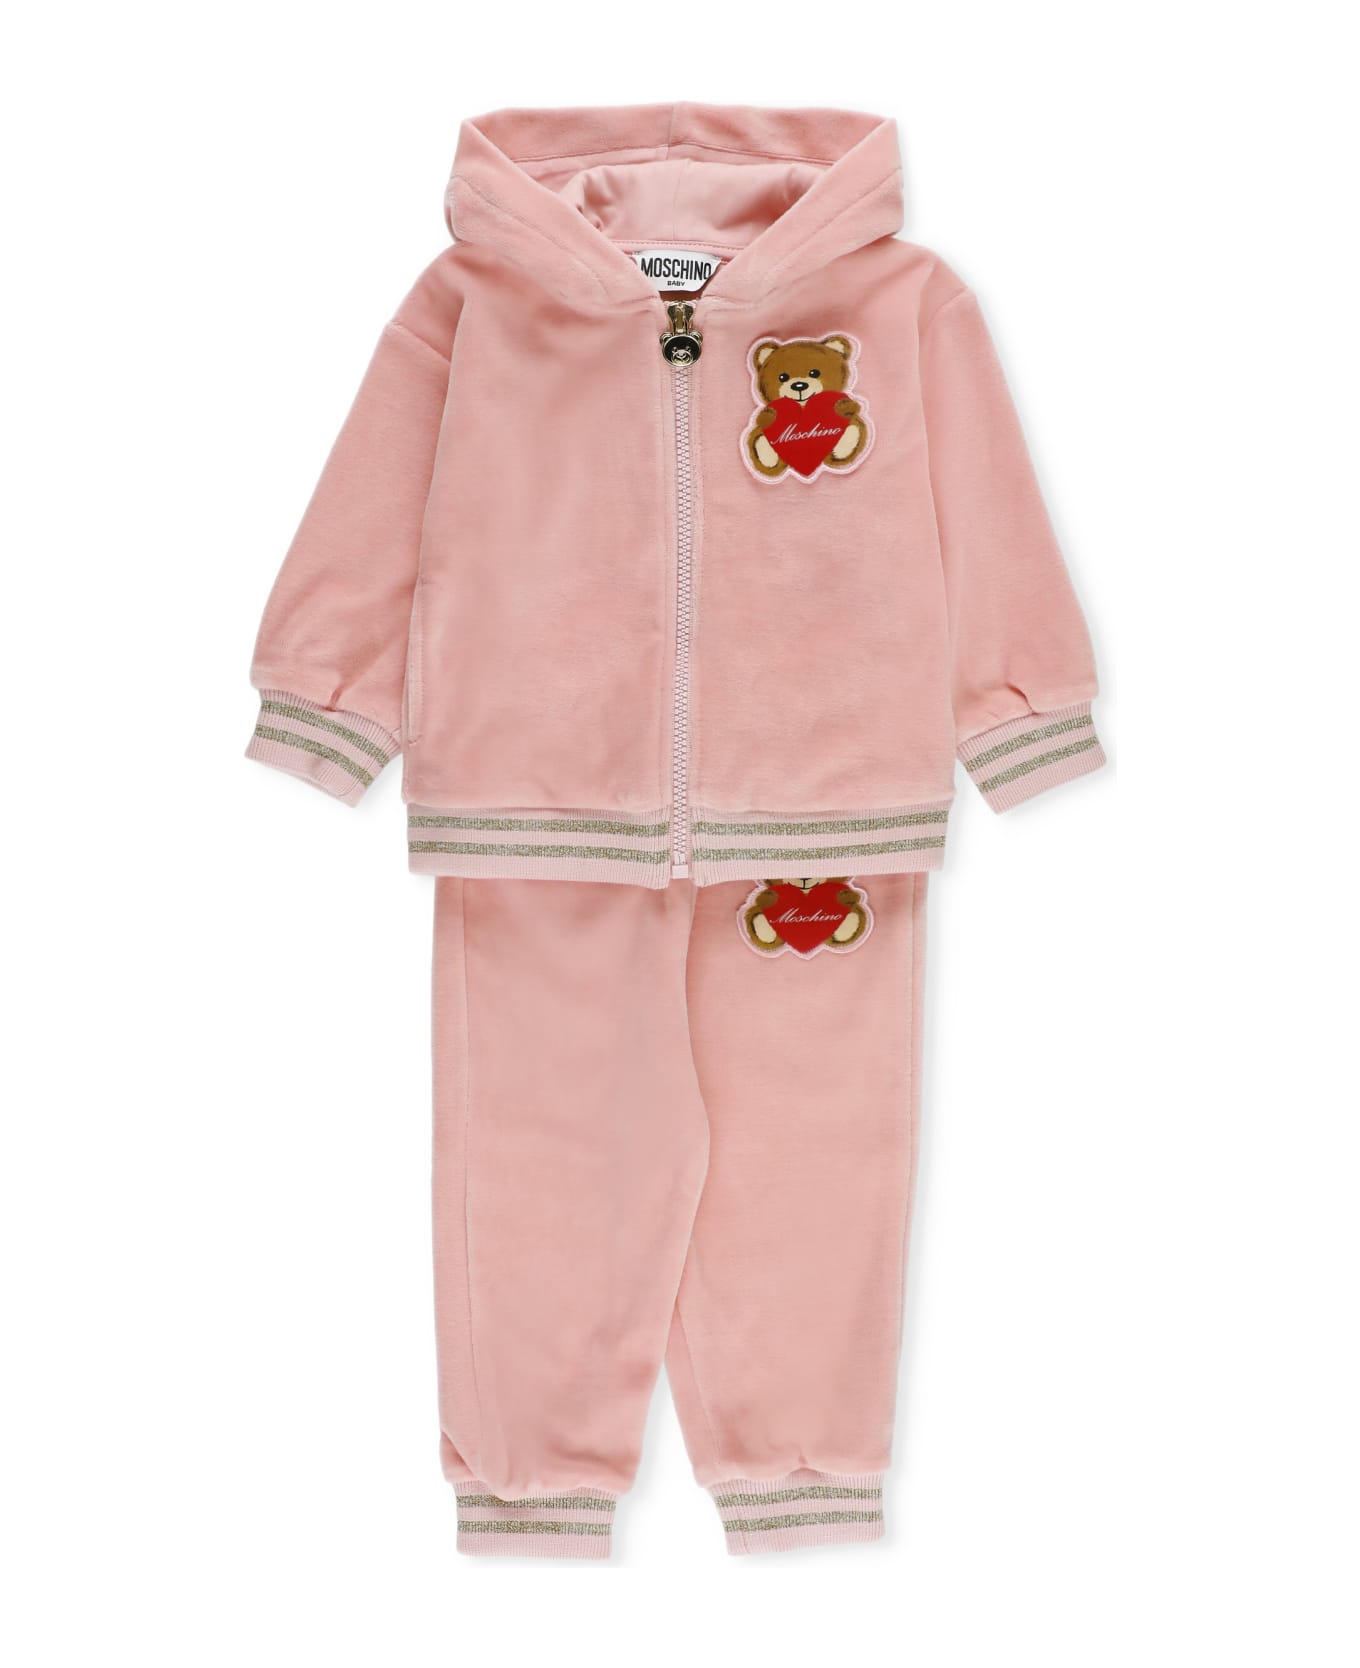 Moschino Teddy Two-piece Set - Pink